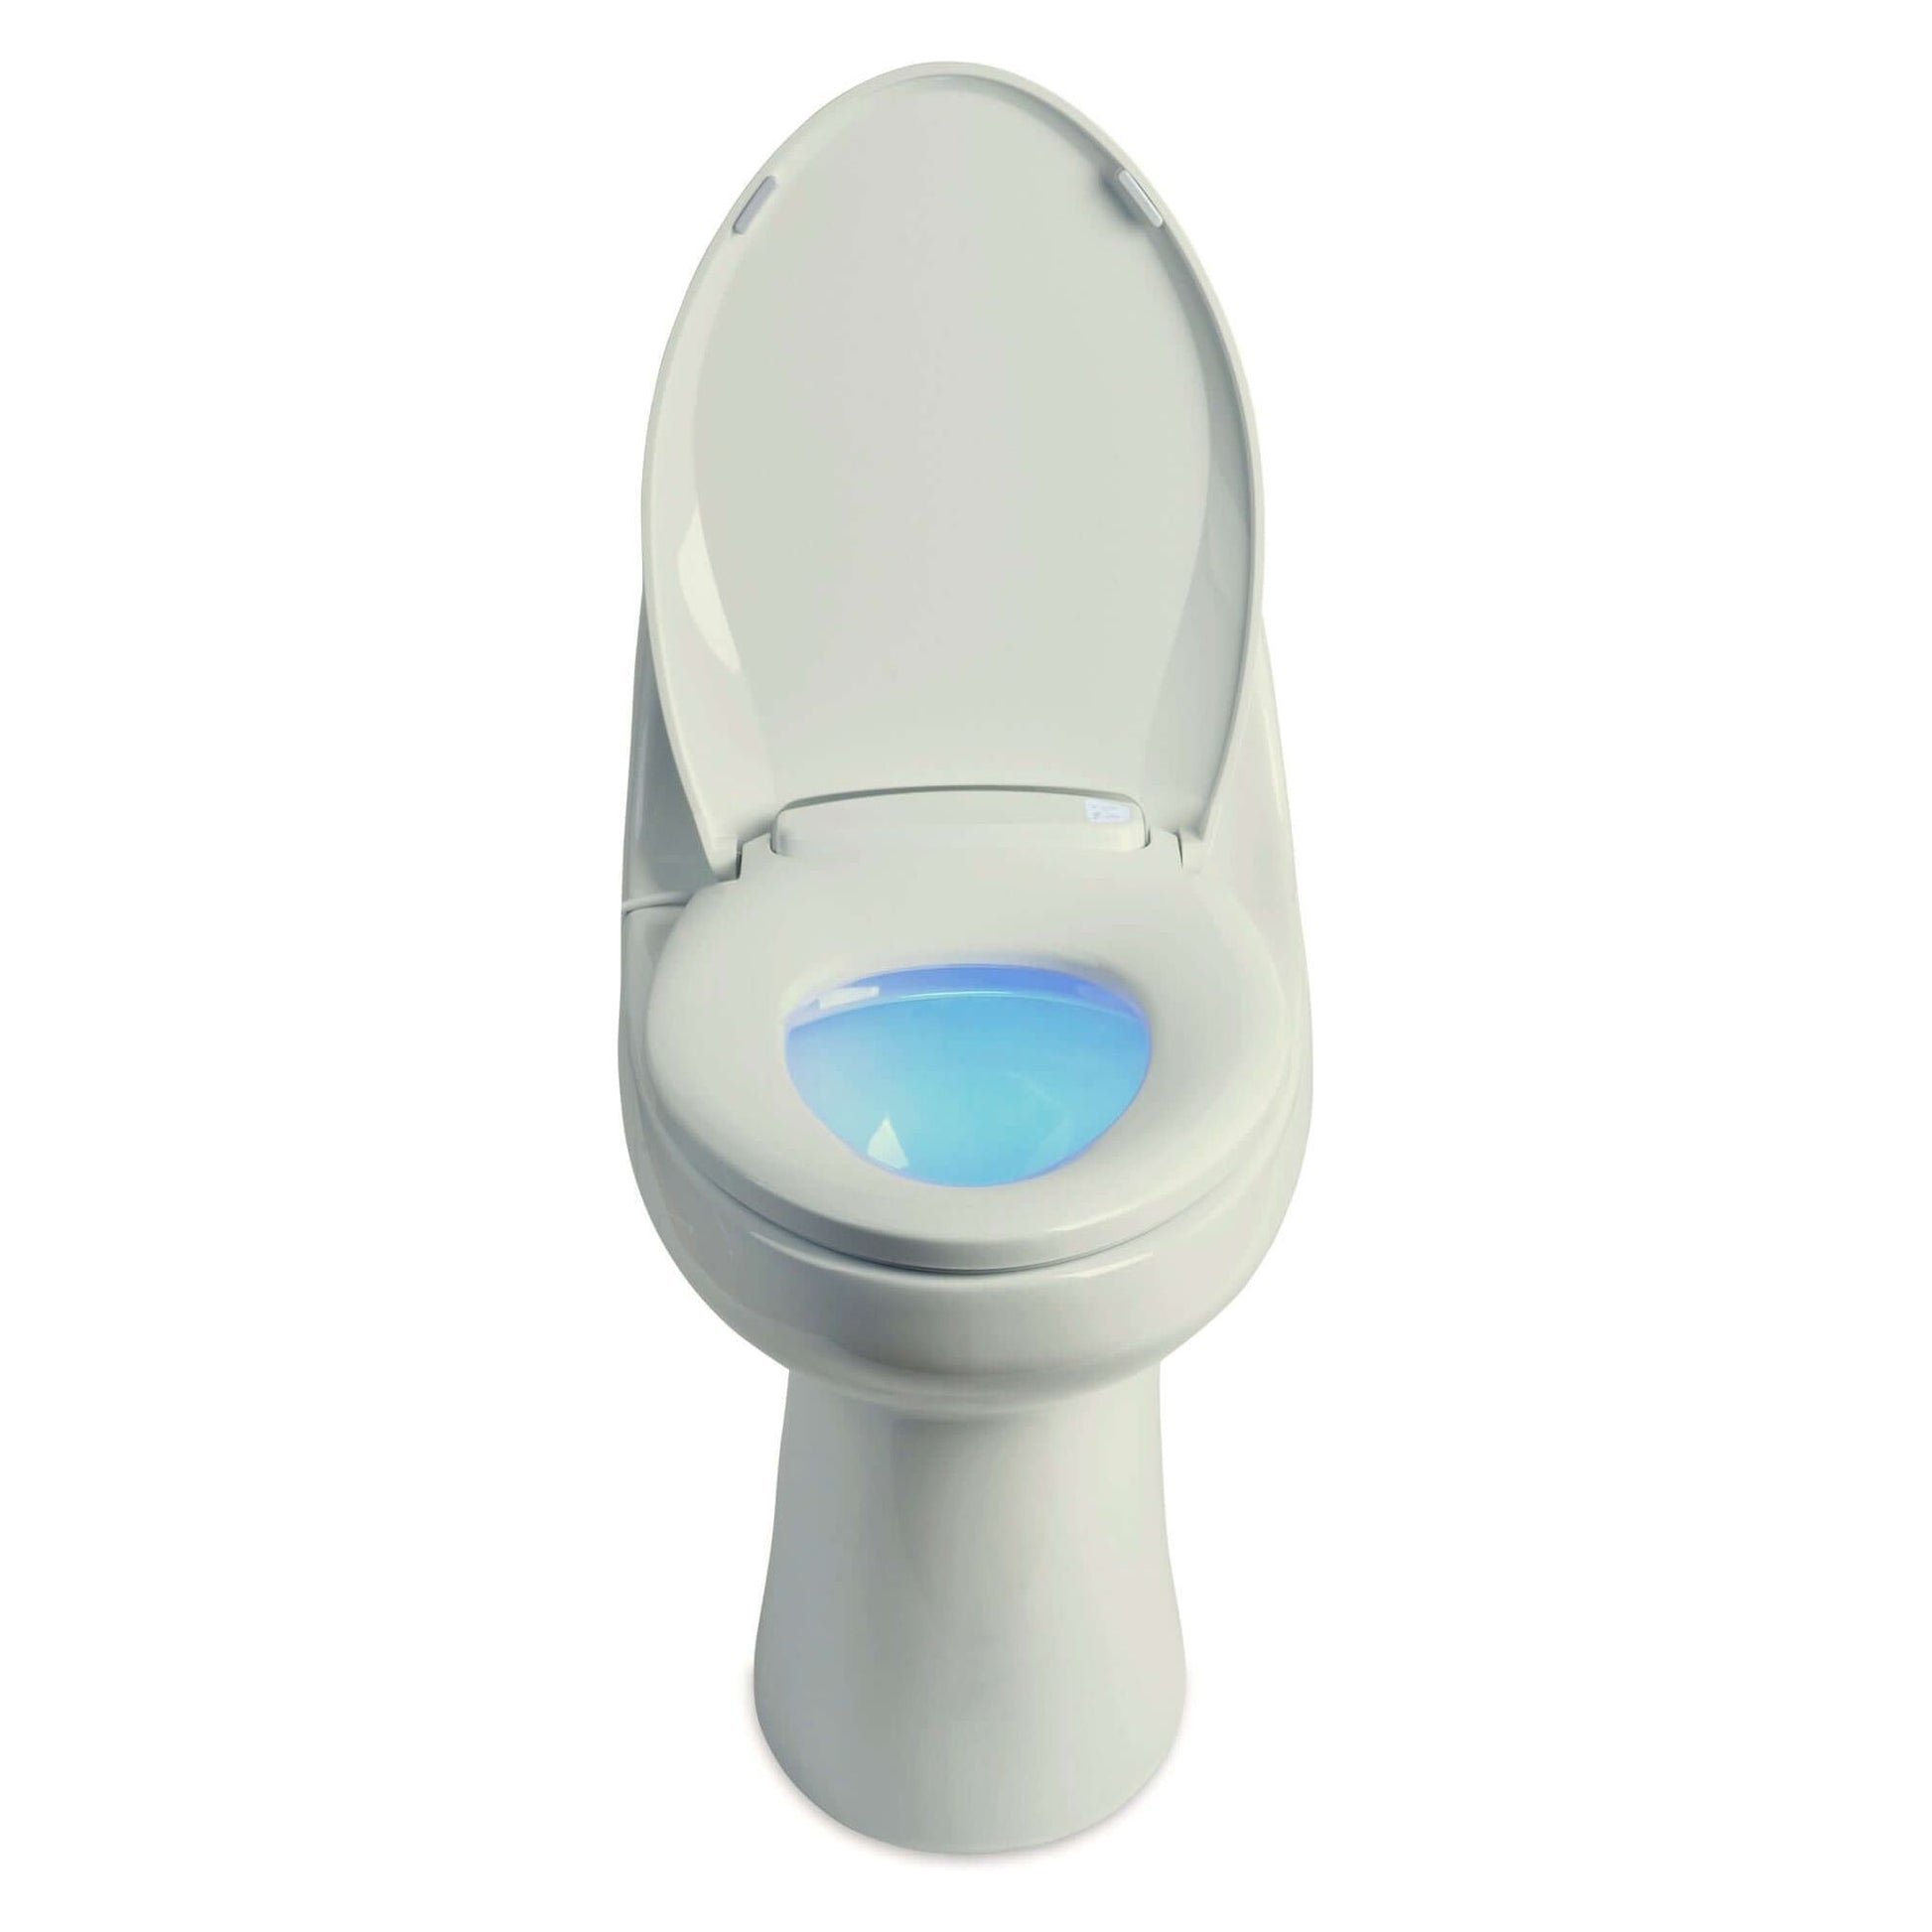 LumaWarm Heated Nightlight Toilet Seat - front view with lid open and nightlight on attached to a toilet 